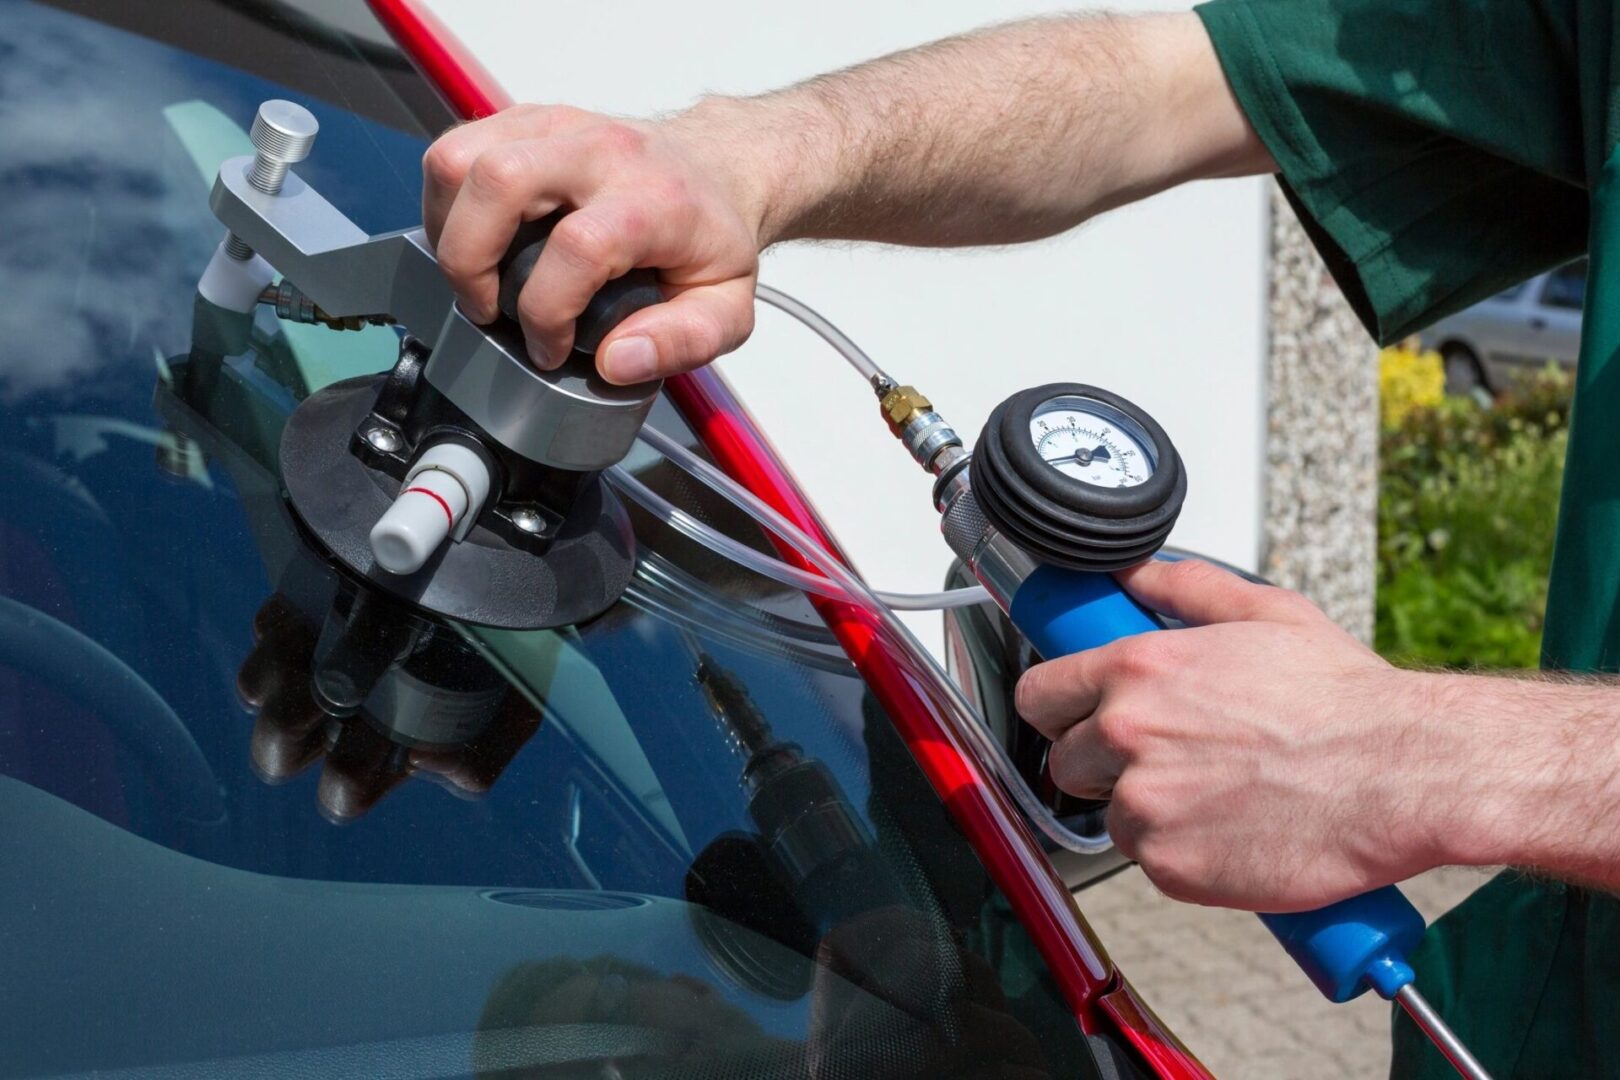 A person is using an air pump to inflate the windshield of their car.